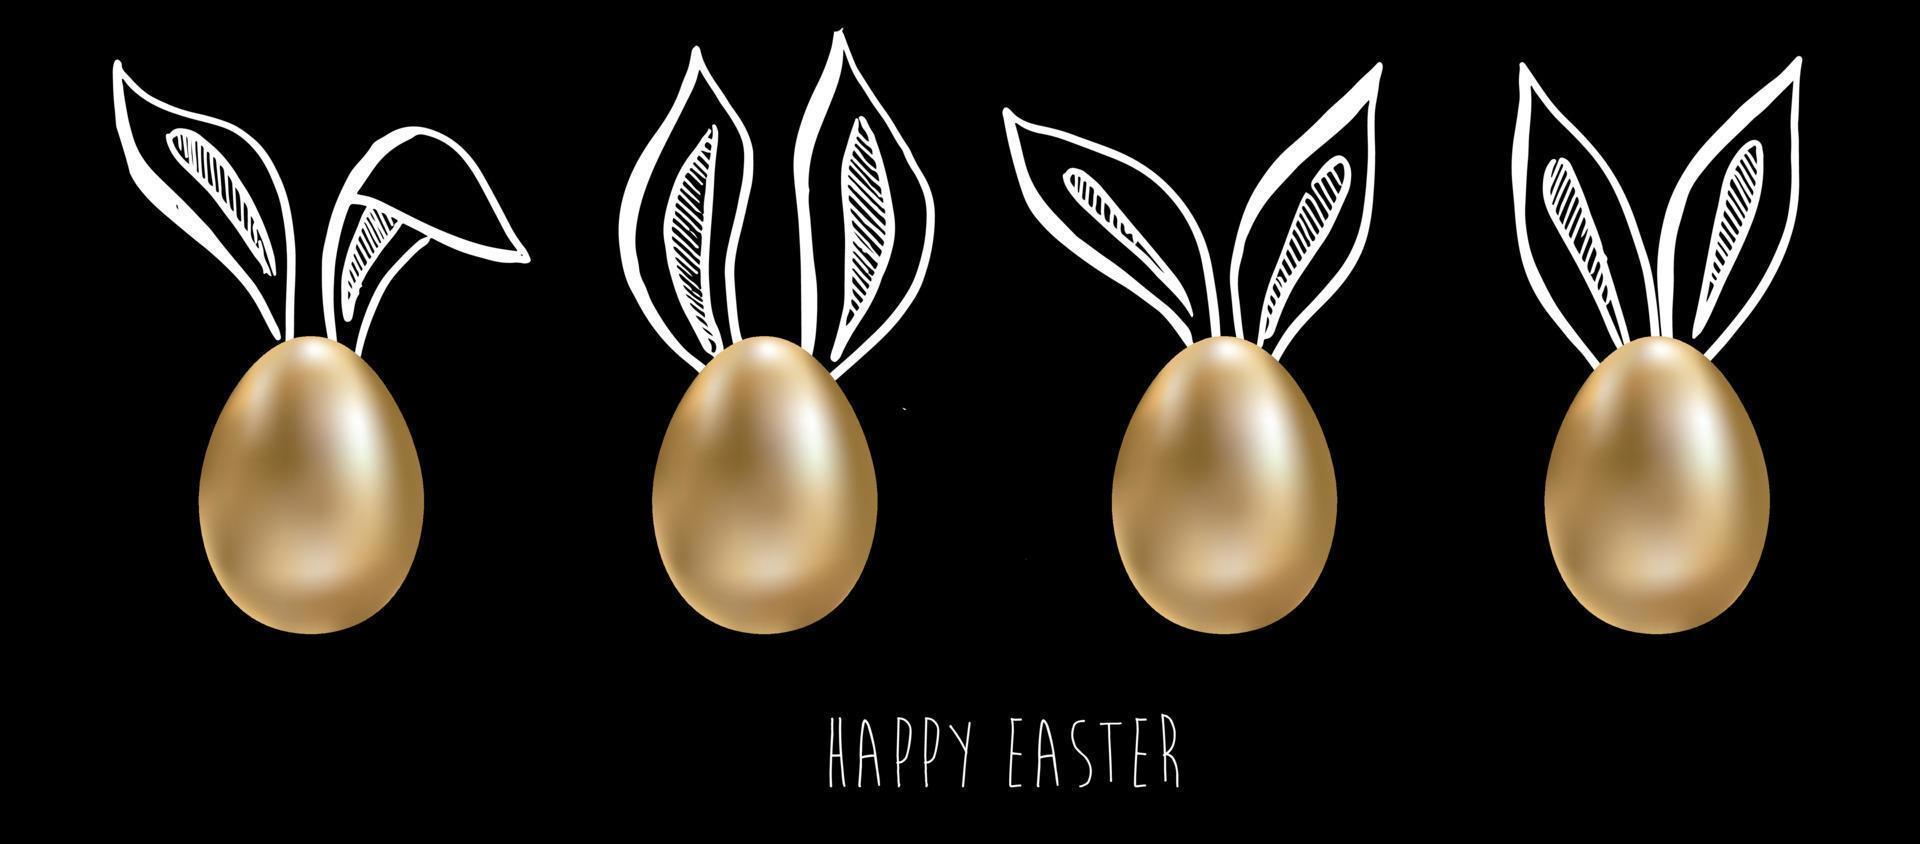 Happy Easter. Set of rabbits's ears, Gold eggs. Hand drawn illustration. vector